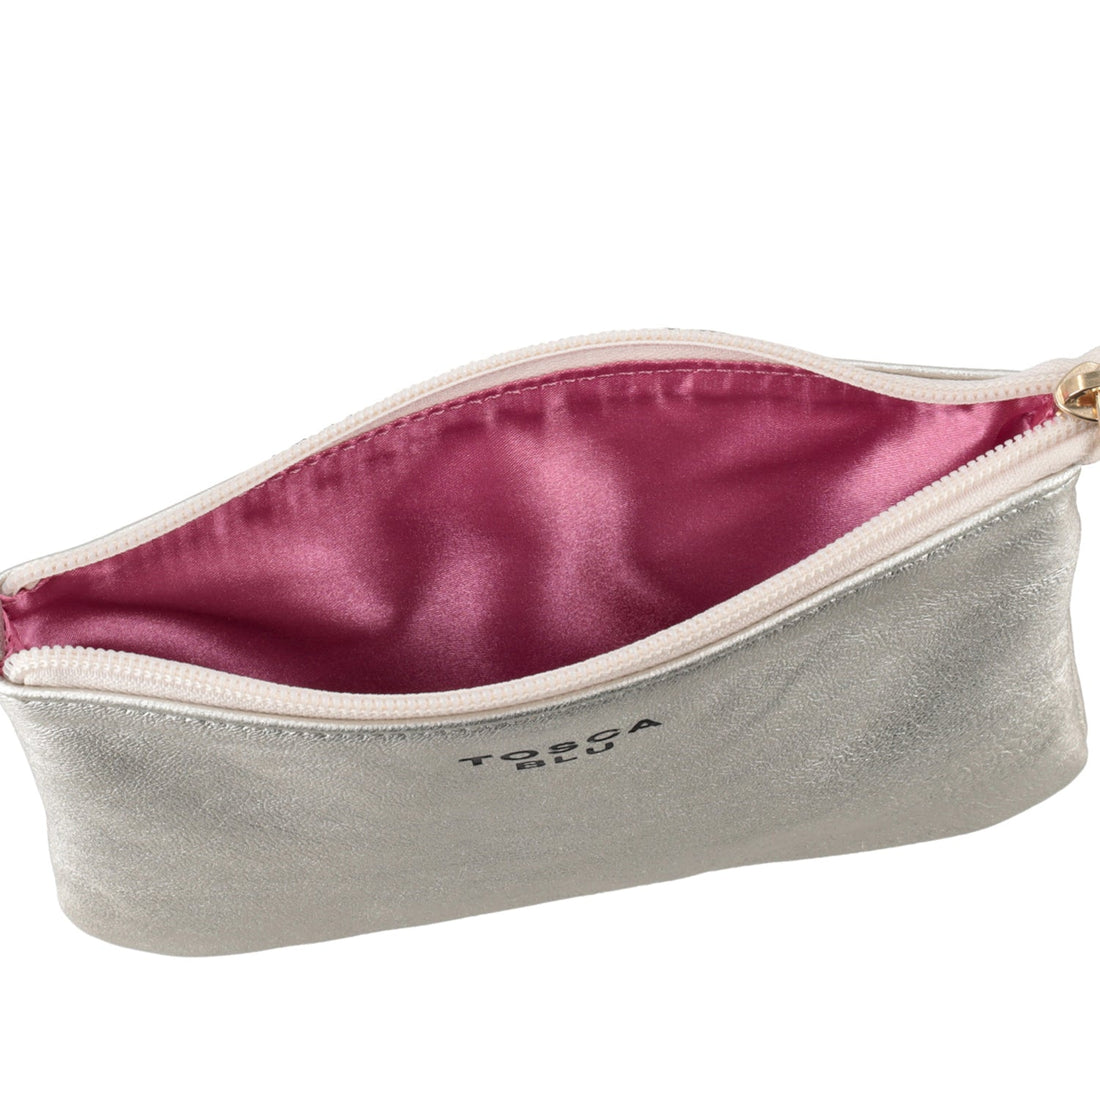 CHAMPAGNE TEQUILA SUNRISE LEATHER POUCH